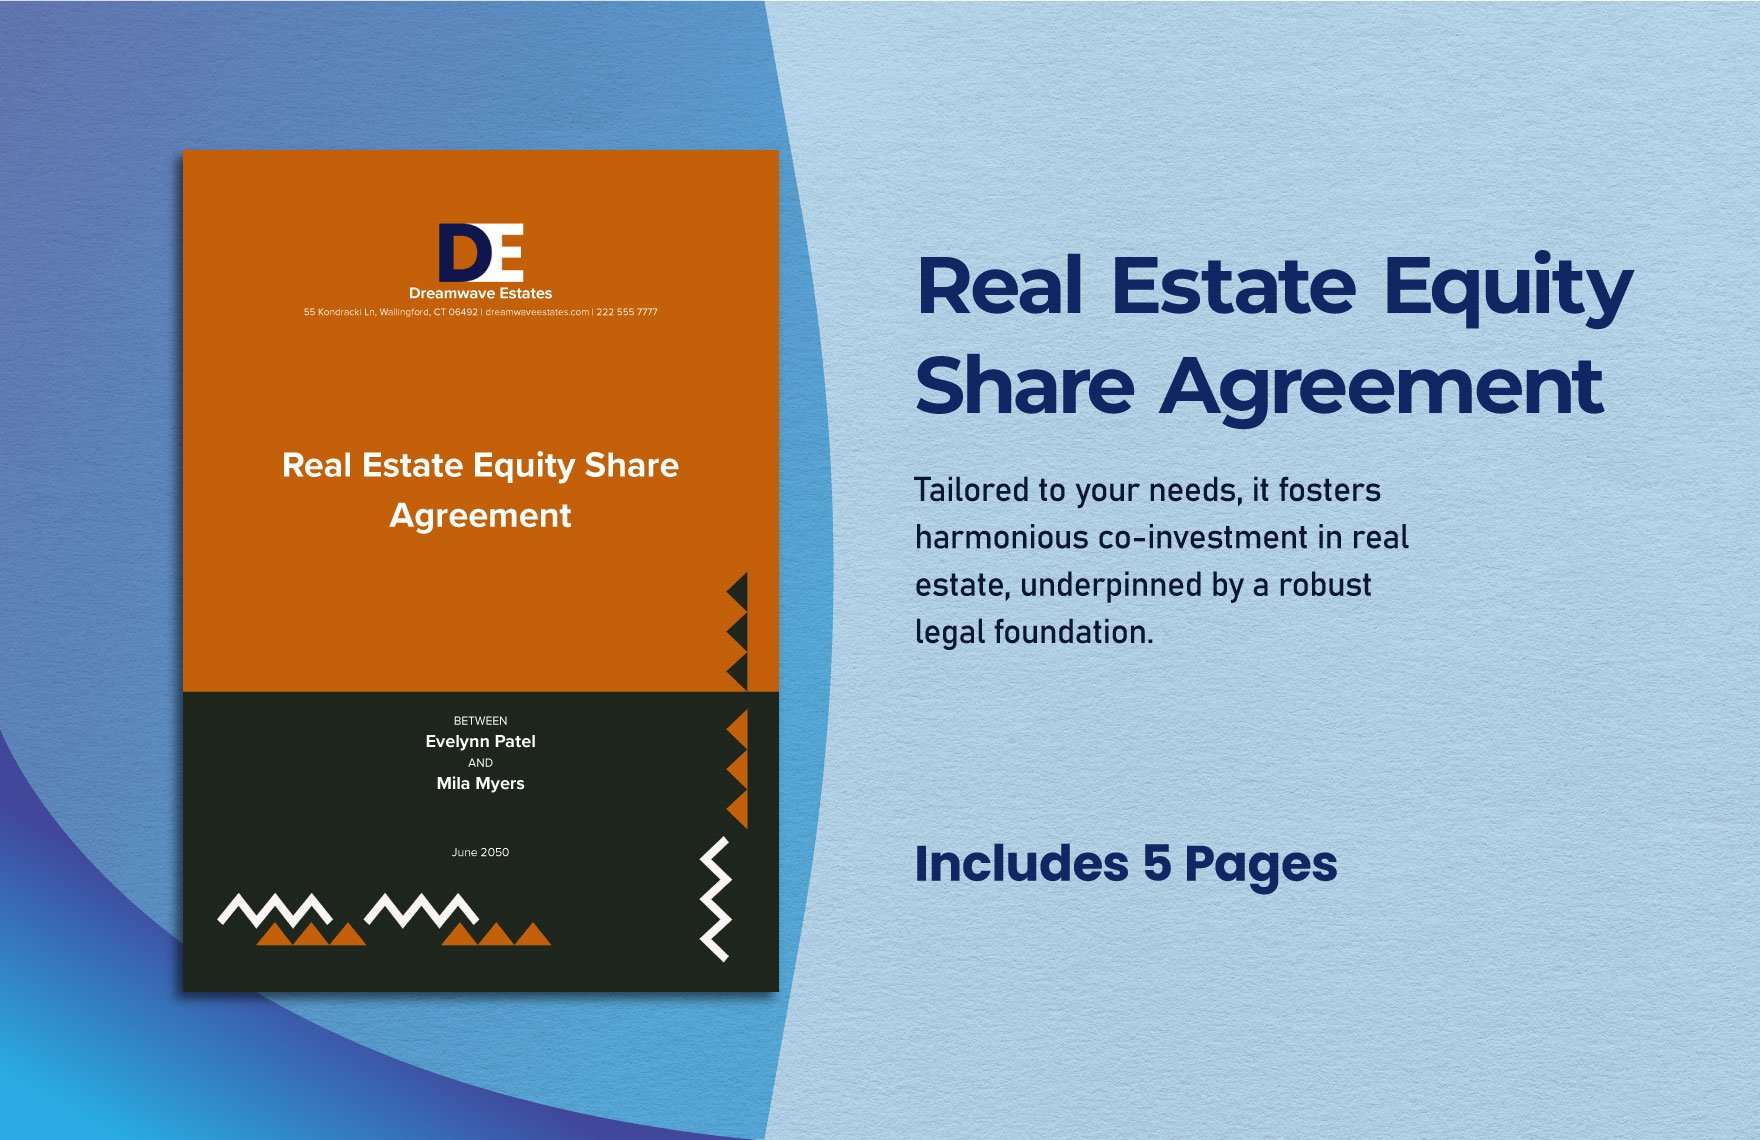 Real Estate Equity Share Agreement